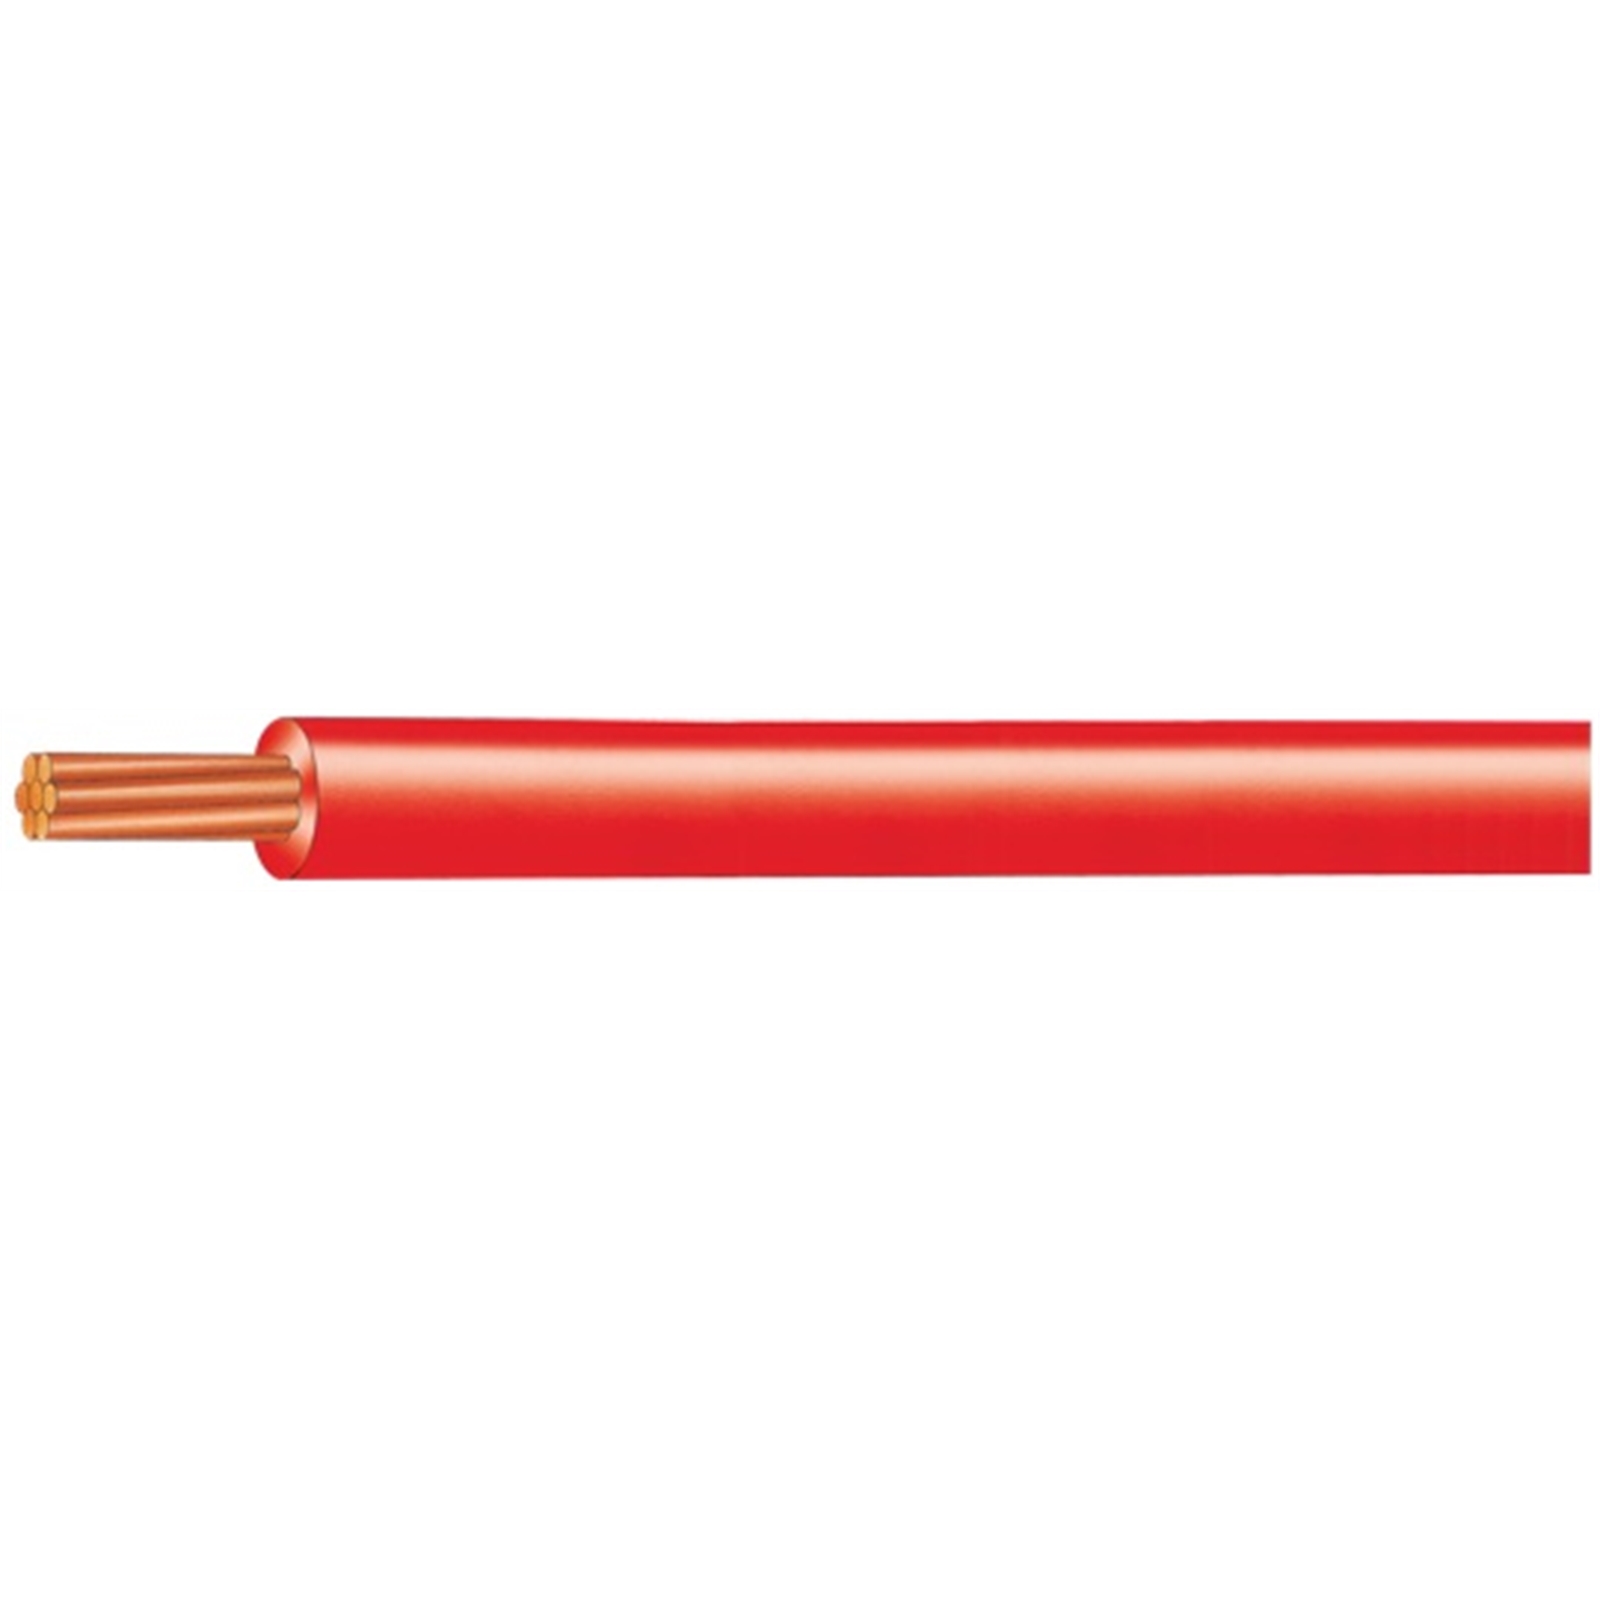 Cable Elect Building Wire P/m 1mm Red Baap02a1001aard